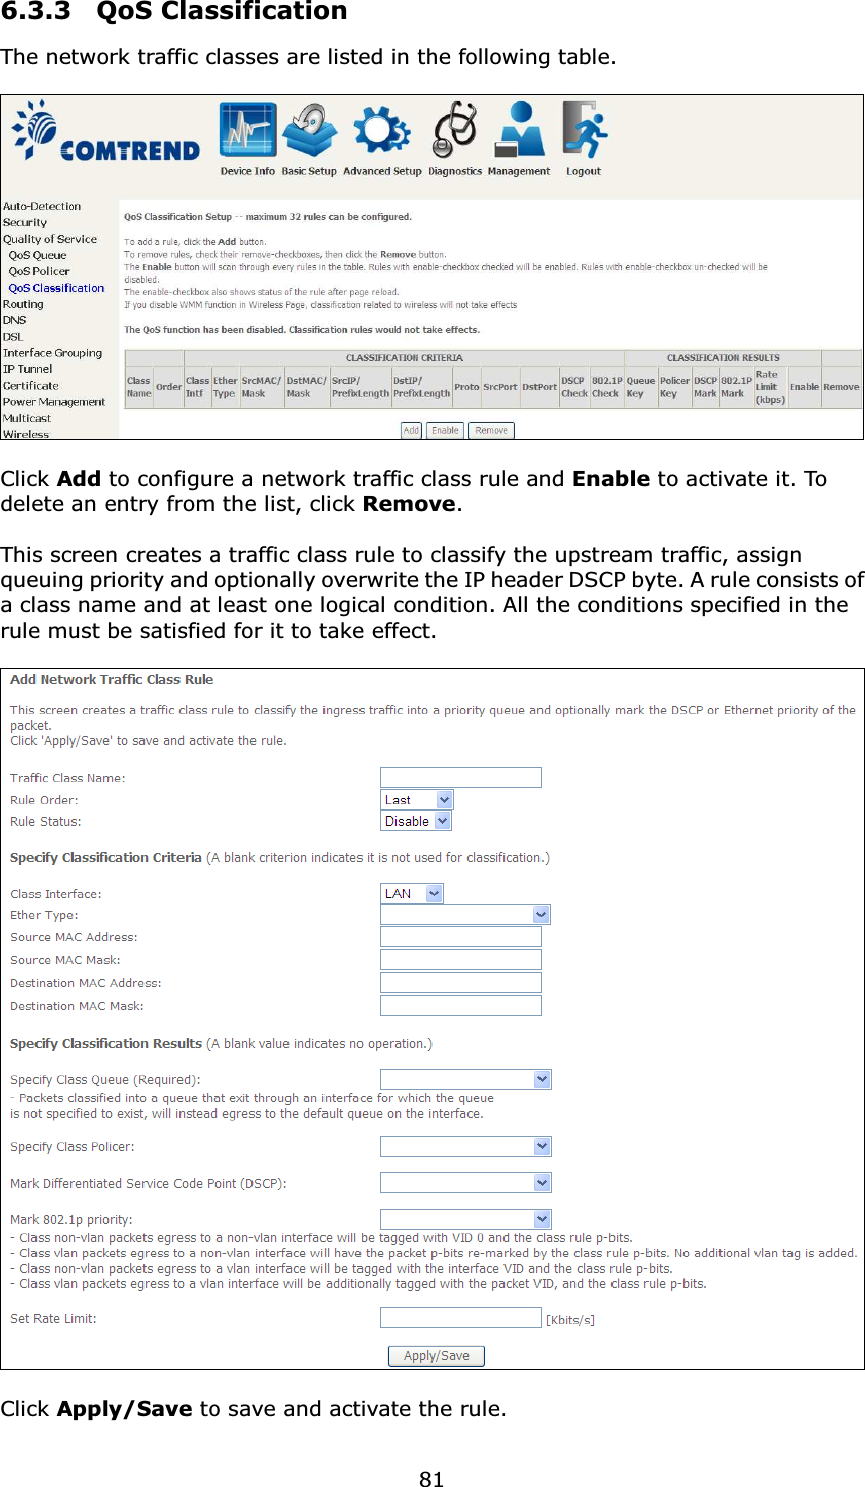  816.3.3  QoS Classification The network traffic classes are listed in the following table.    Click Add to configure a network traffic class rule and Enable to activate it. To delete an entry from the list, click Remove.  This screen creates a traffic class rule to classify the upstream traffic, assign queuing priority and optionally overwrite the IP header DSCP byte. A rule consists of a class name and at least one logical condition. All the conditions specified in the rule must be satisfied for it to take effect.    Click Apply/Save to save and activate the rule. 